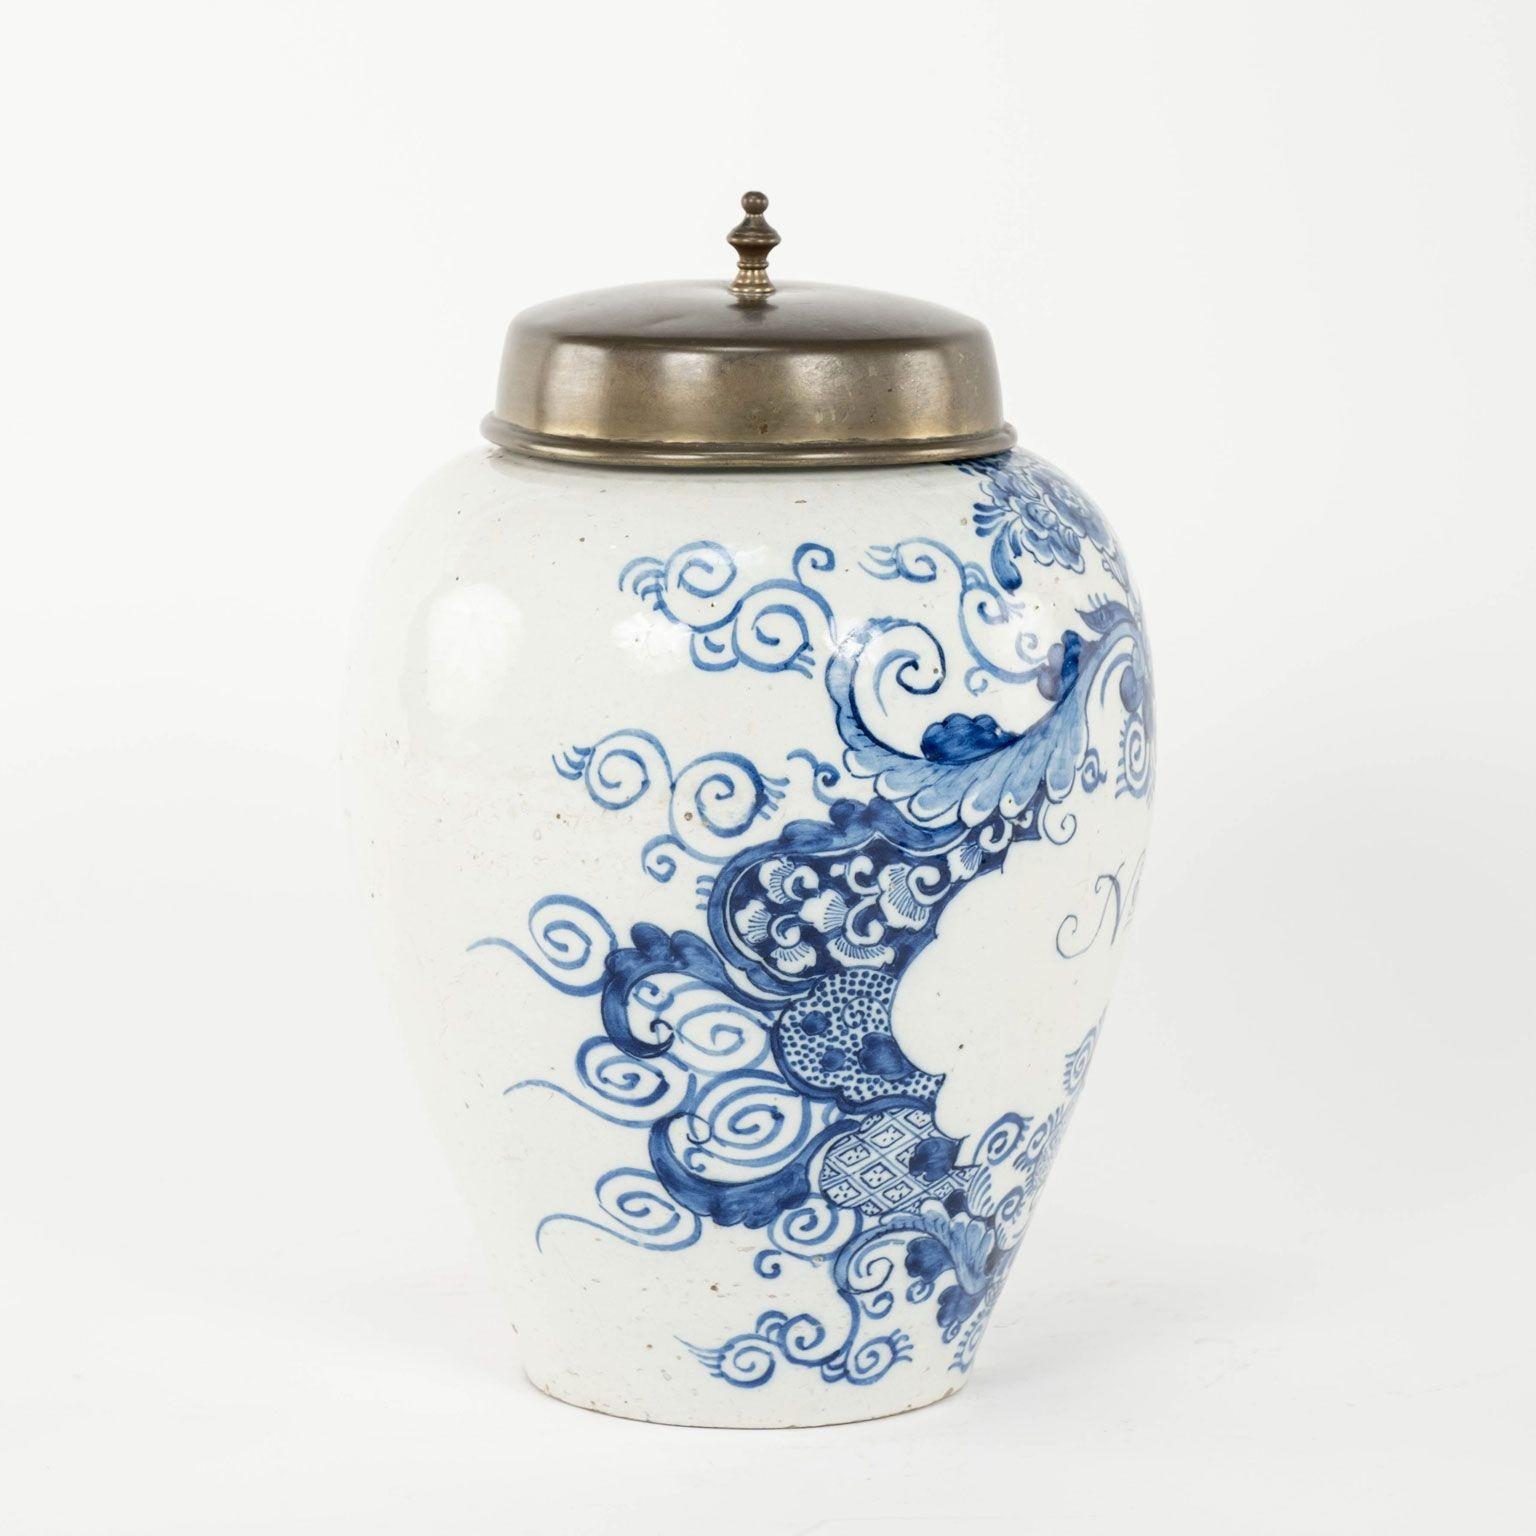 Delft blue and white No 8 tobacco jar circa 1790-1809. Urn-shape jar with brass lid from the Netherlands. In faience with blue painted leaf medallion labeled 